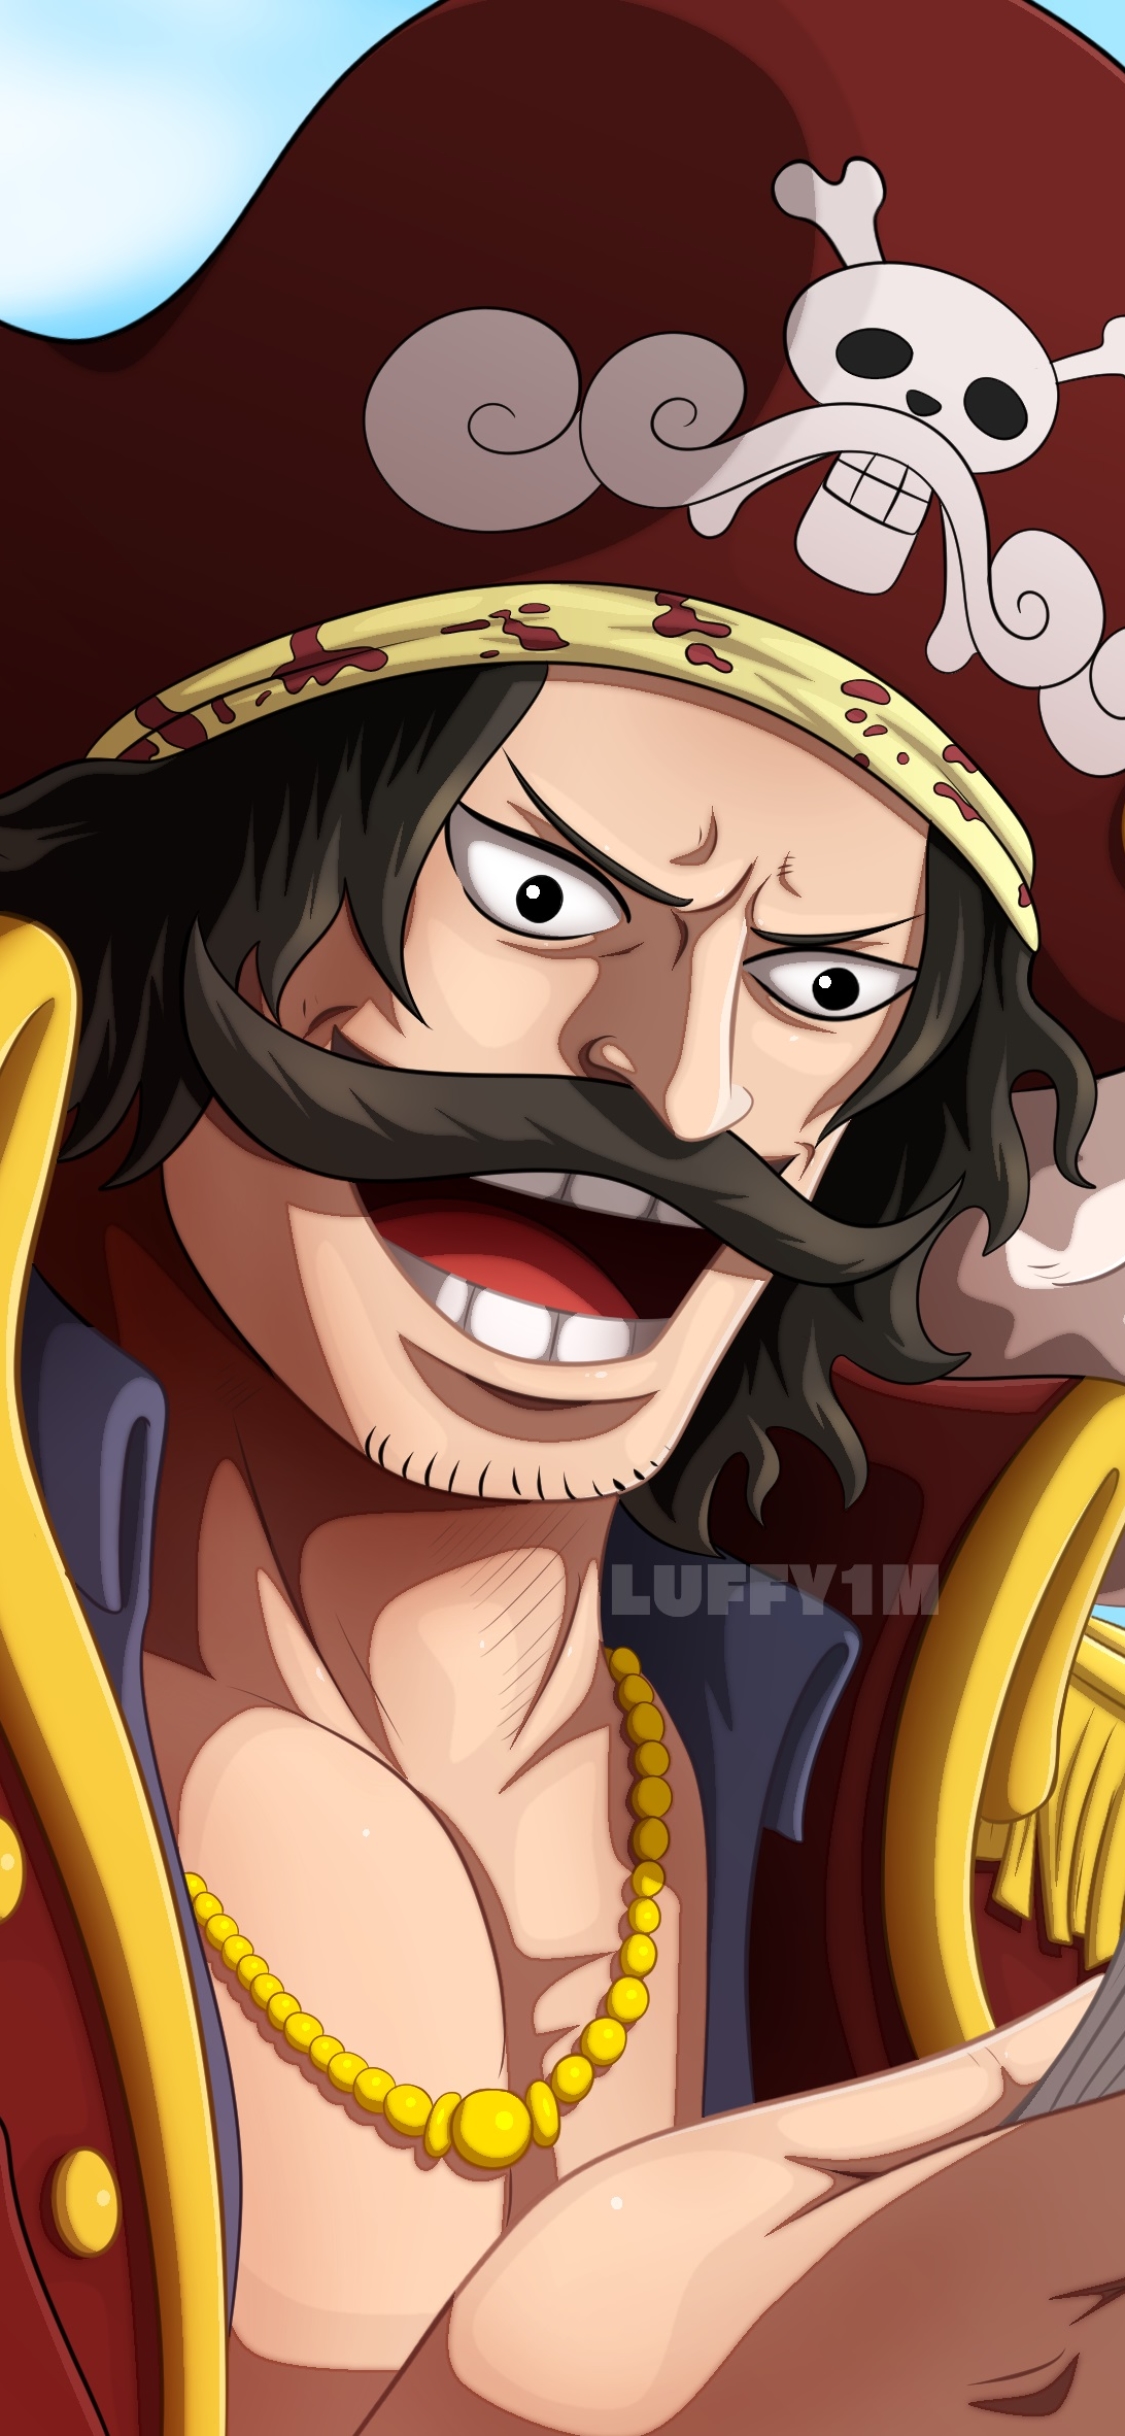 Anime One Piece Phone Wallpaper by luffy1m